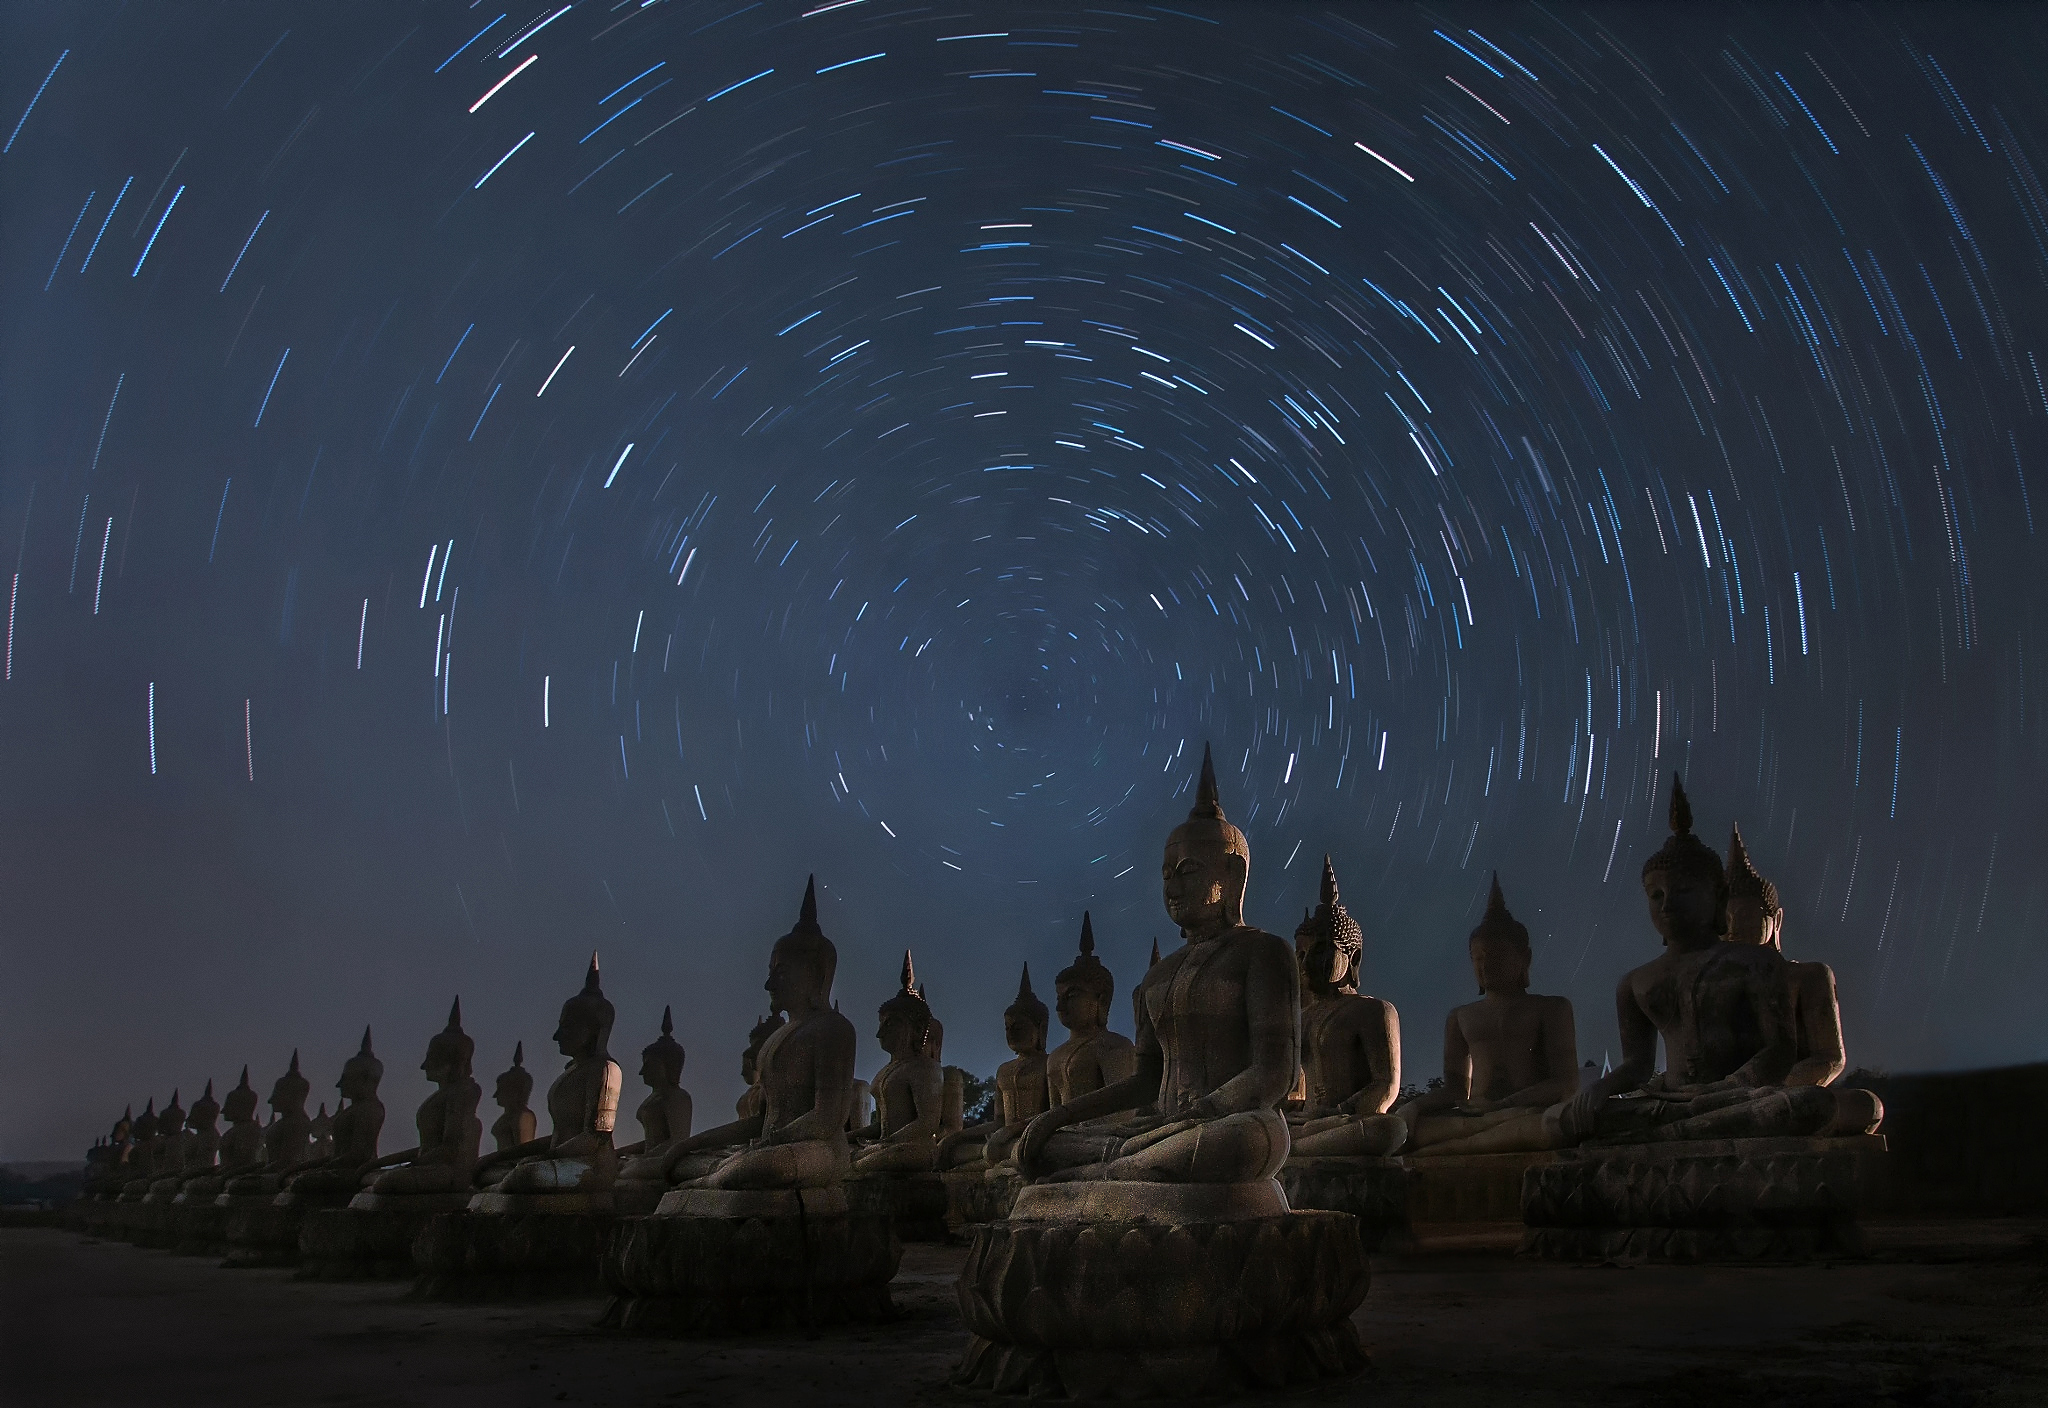 buddha, thailand, religious, night, starry sky, statue, time lapse High Definition image